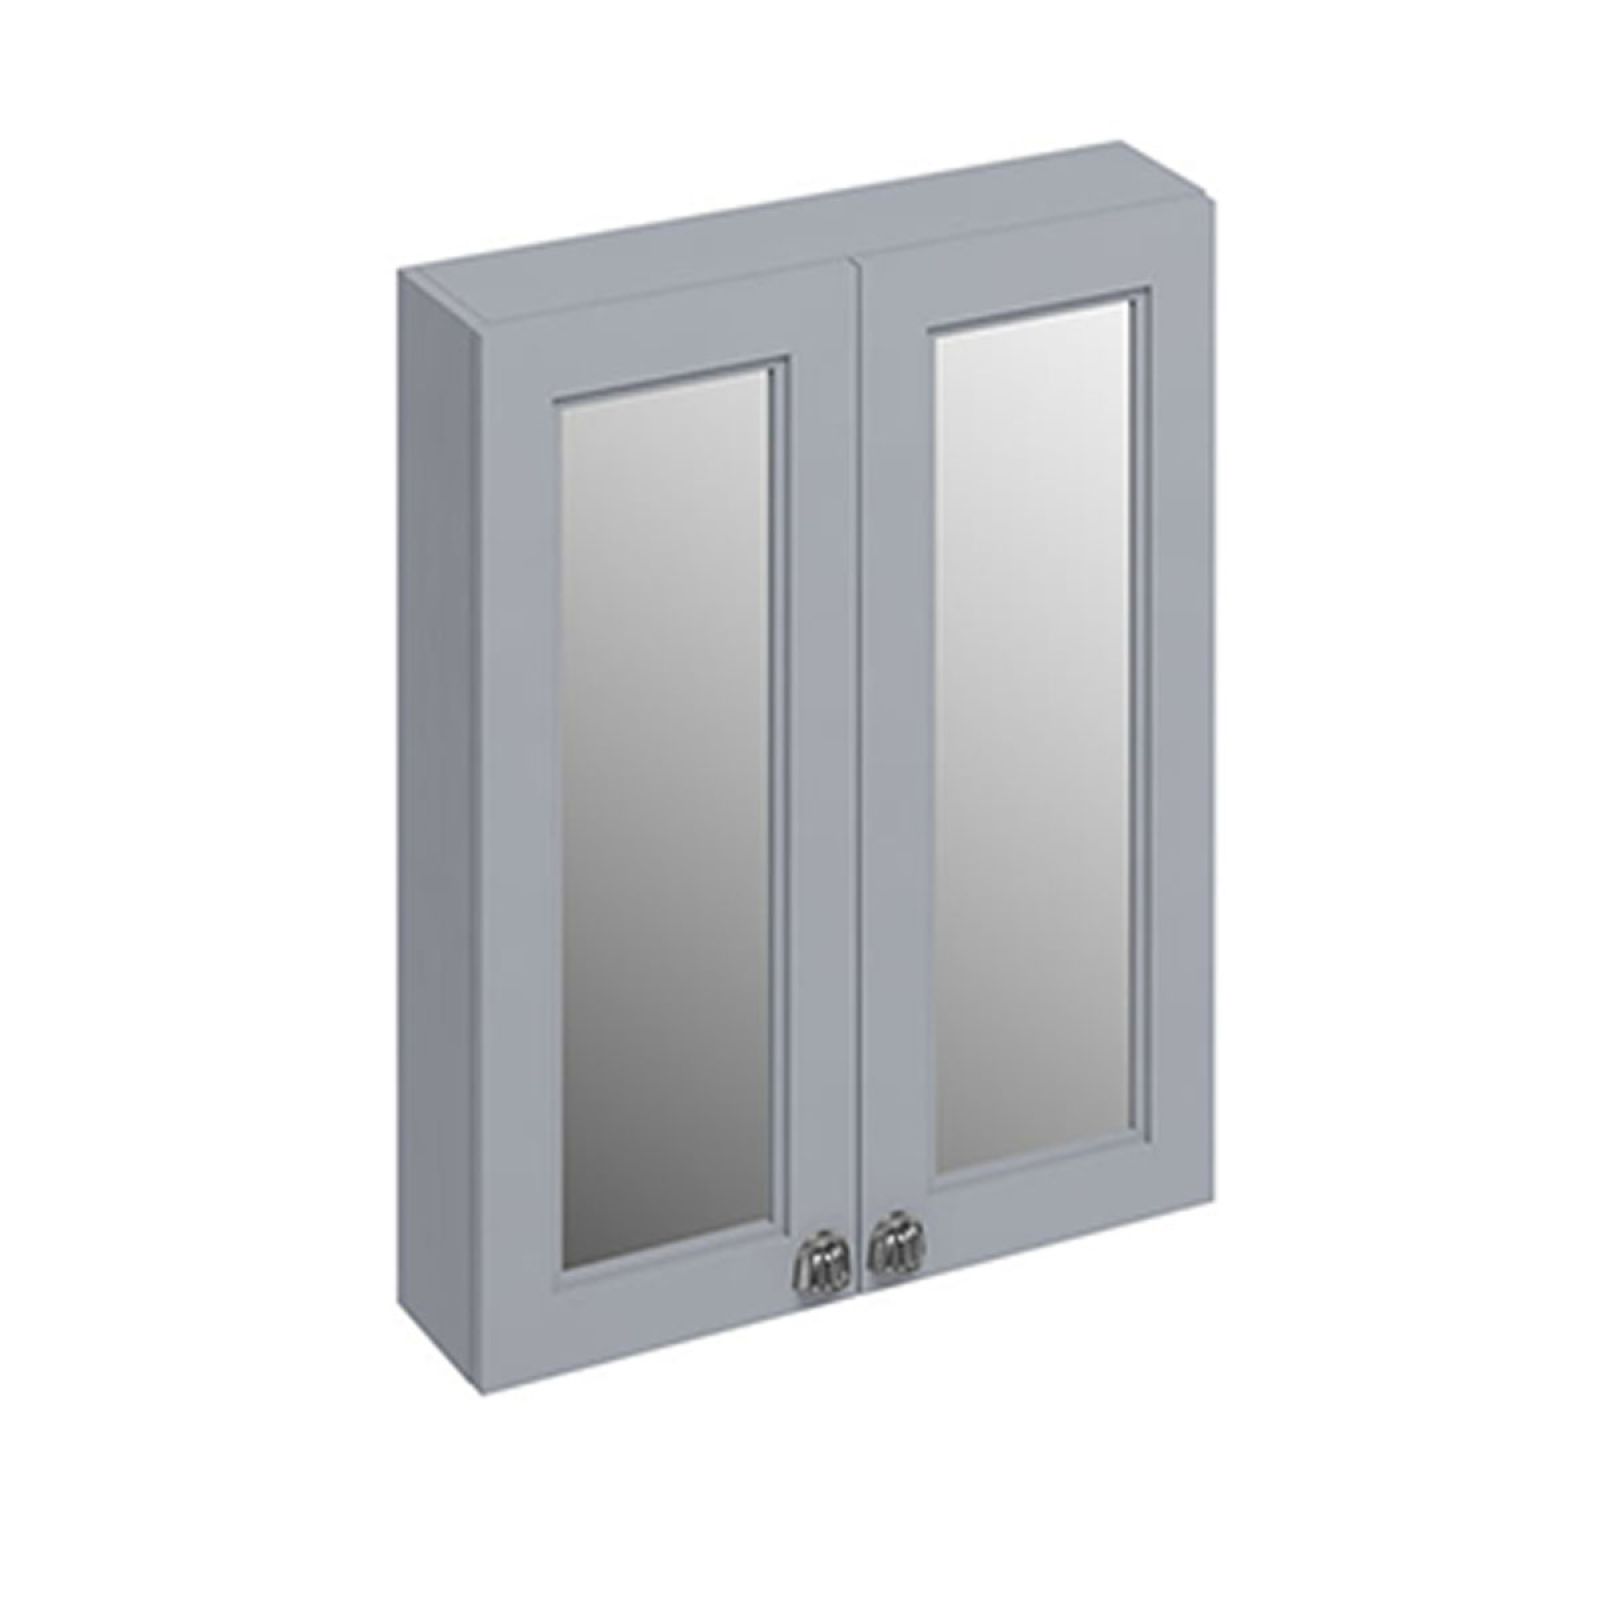 60cm wide double door wall mirror unit in a choice of colours